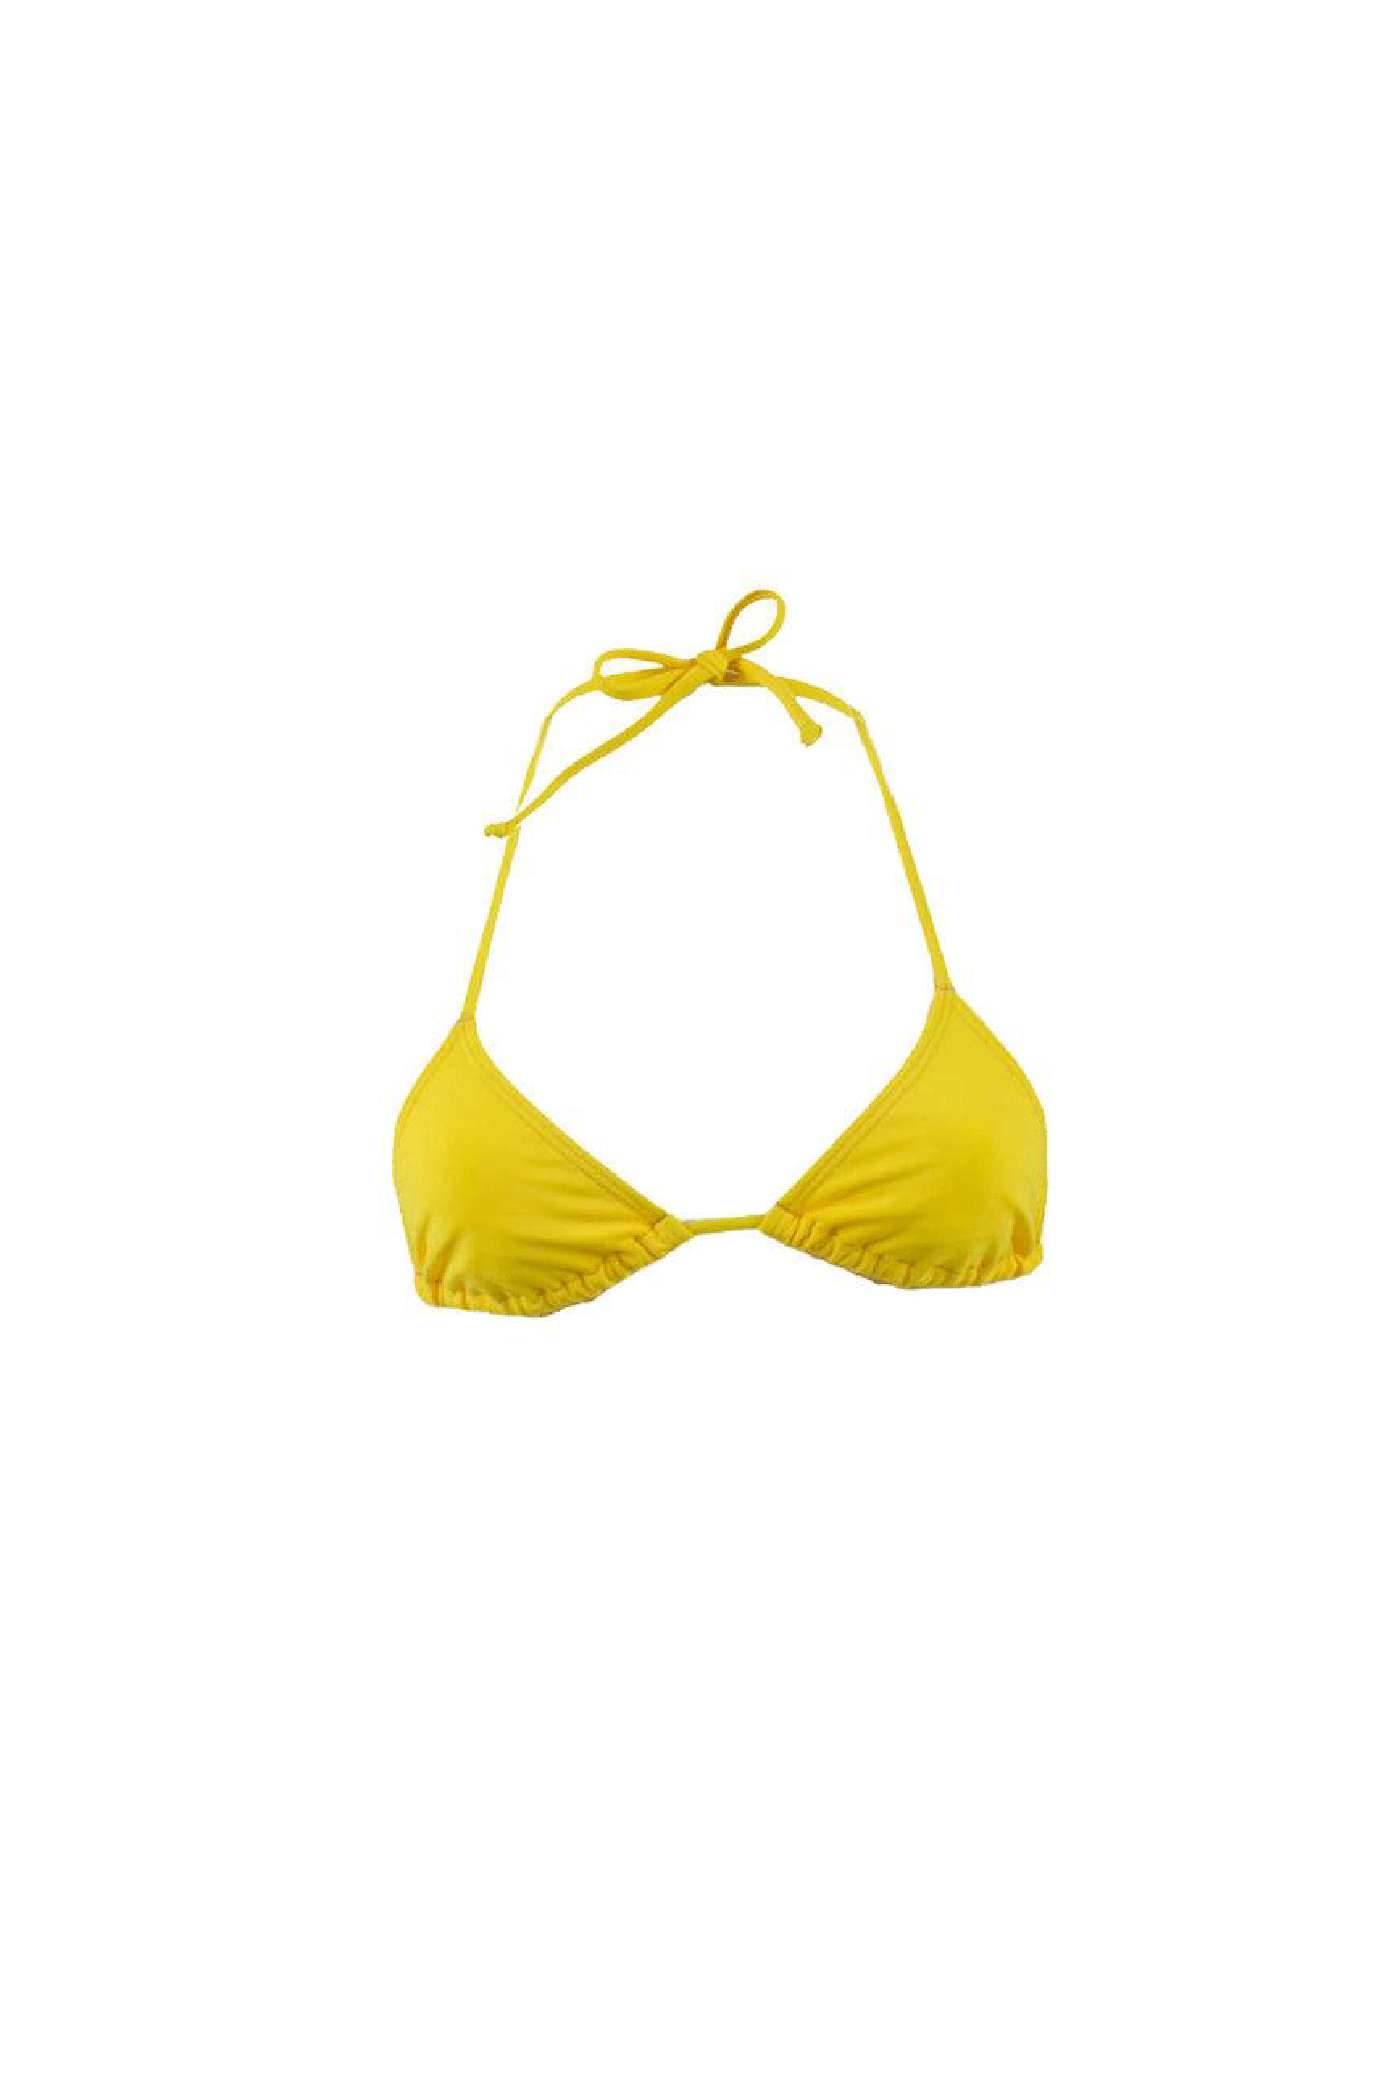 All The Time Sunshine // Triangle Halter top